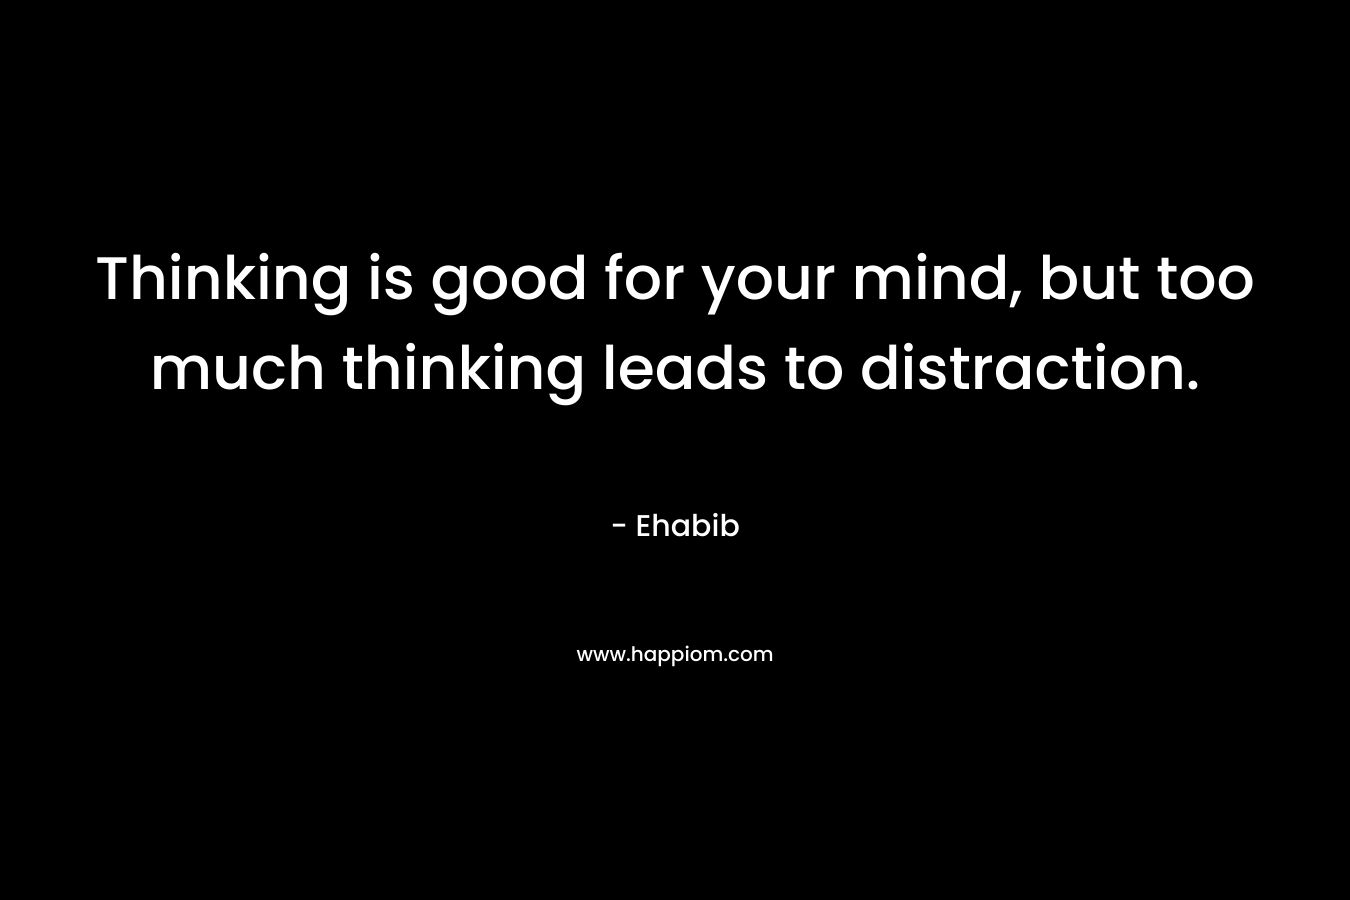 Thinking is good for your mind, but too much thinking leads to distraction.